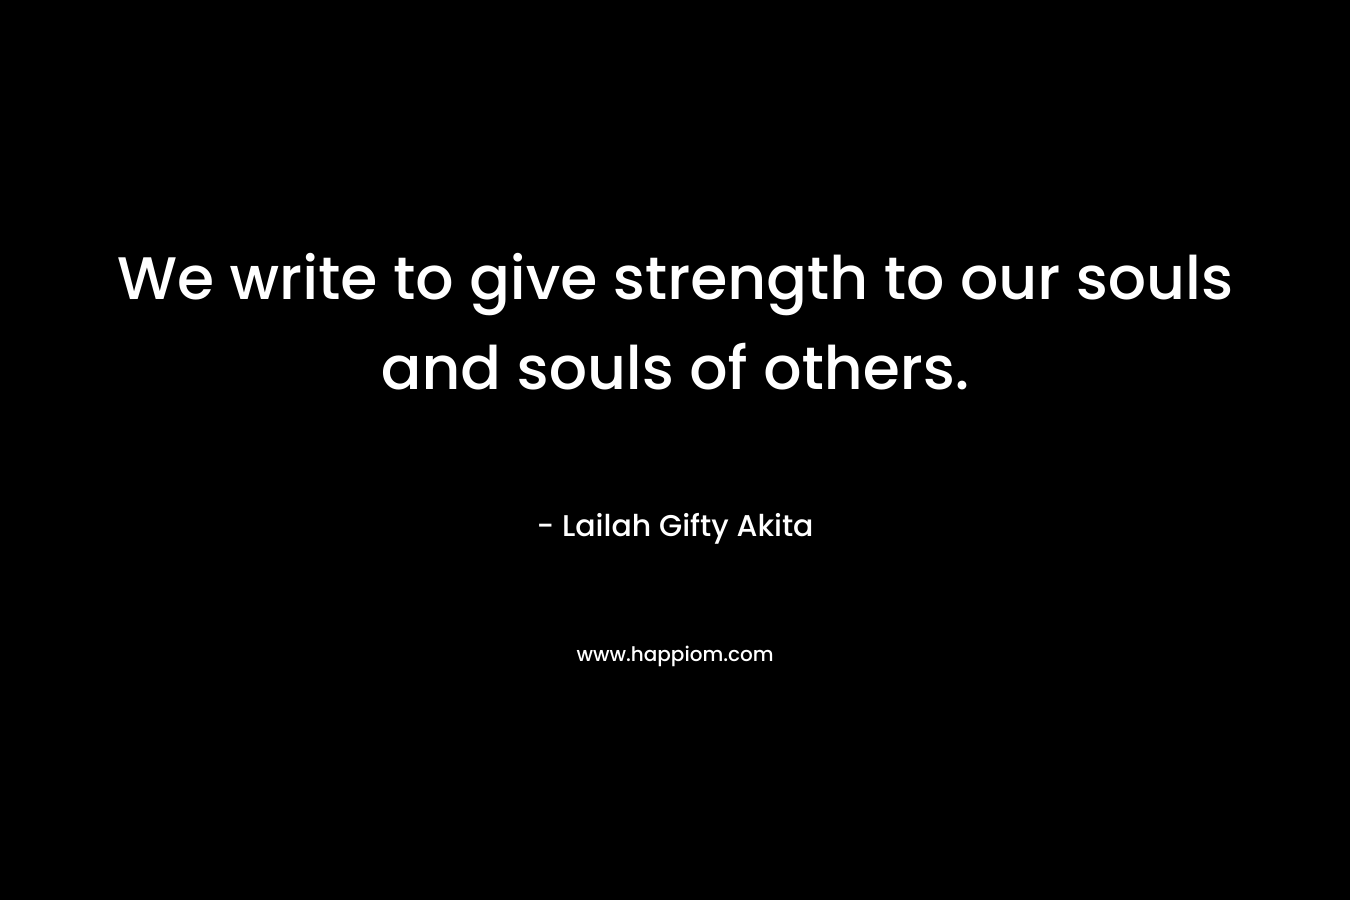 We write to give strength to our souls and souls of others.